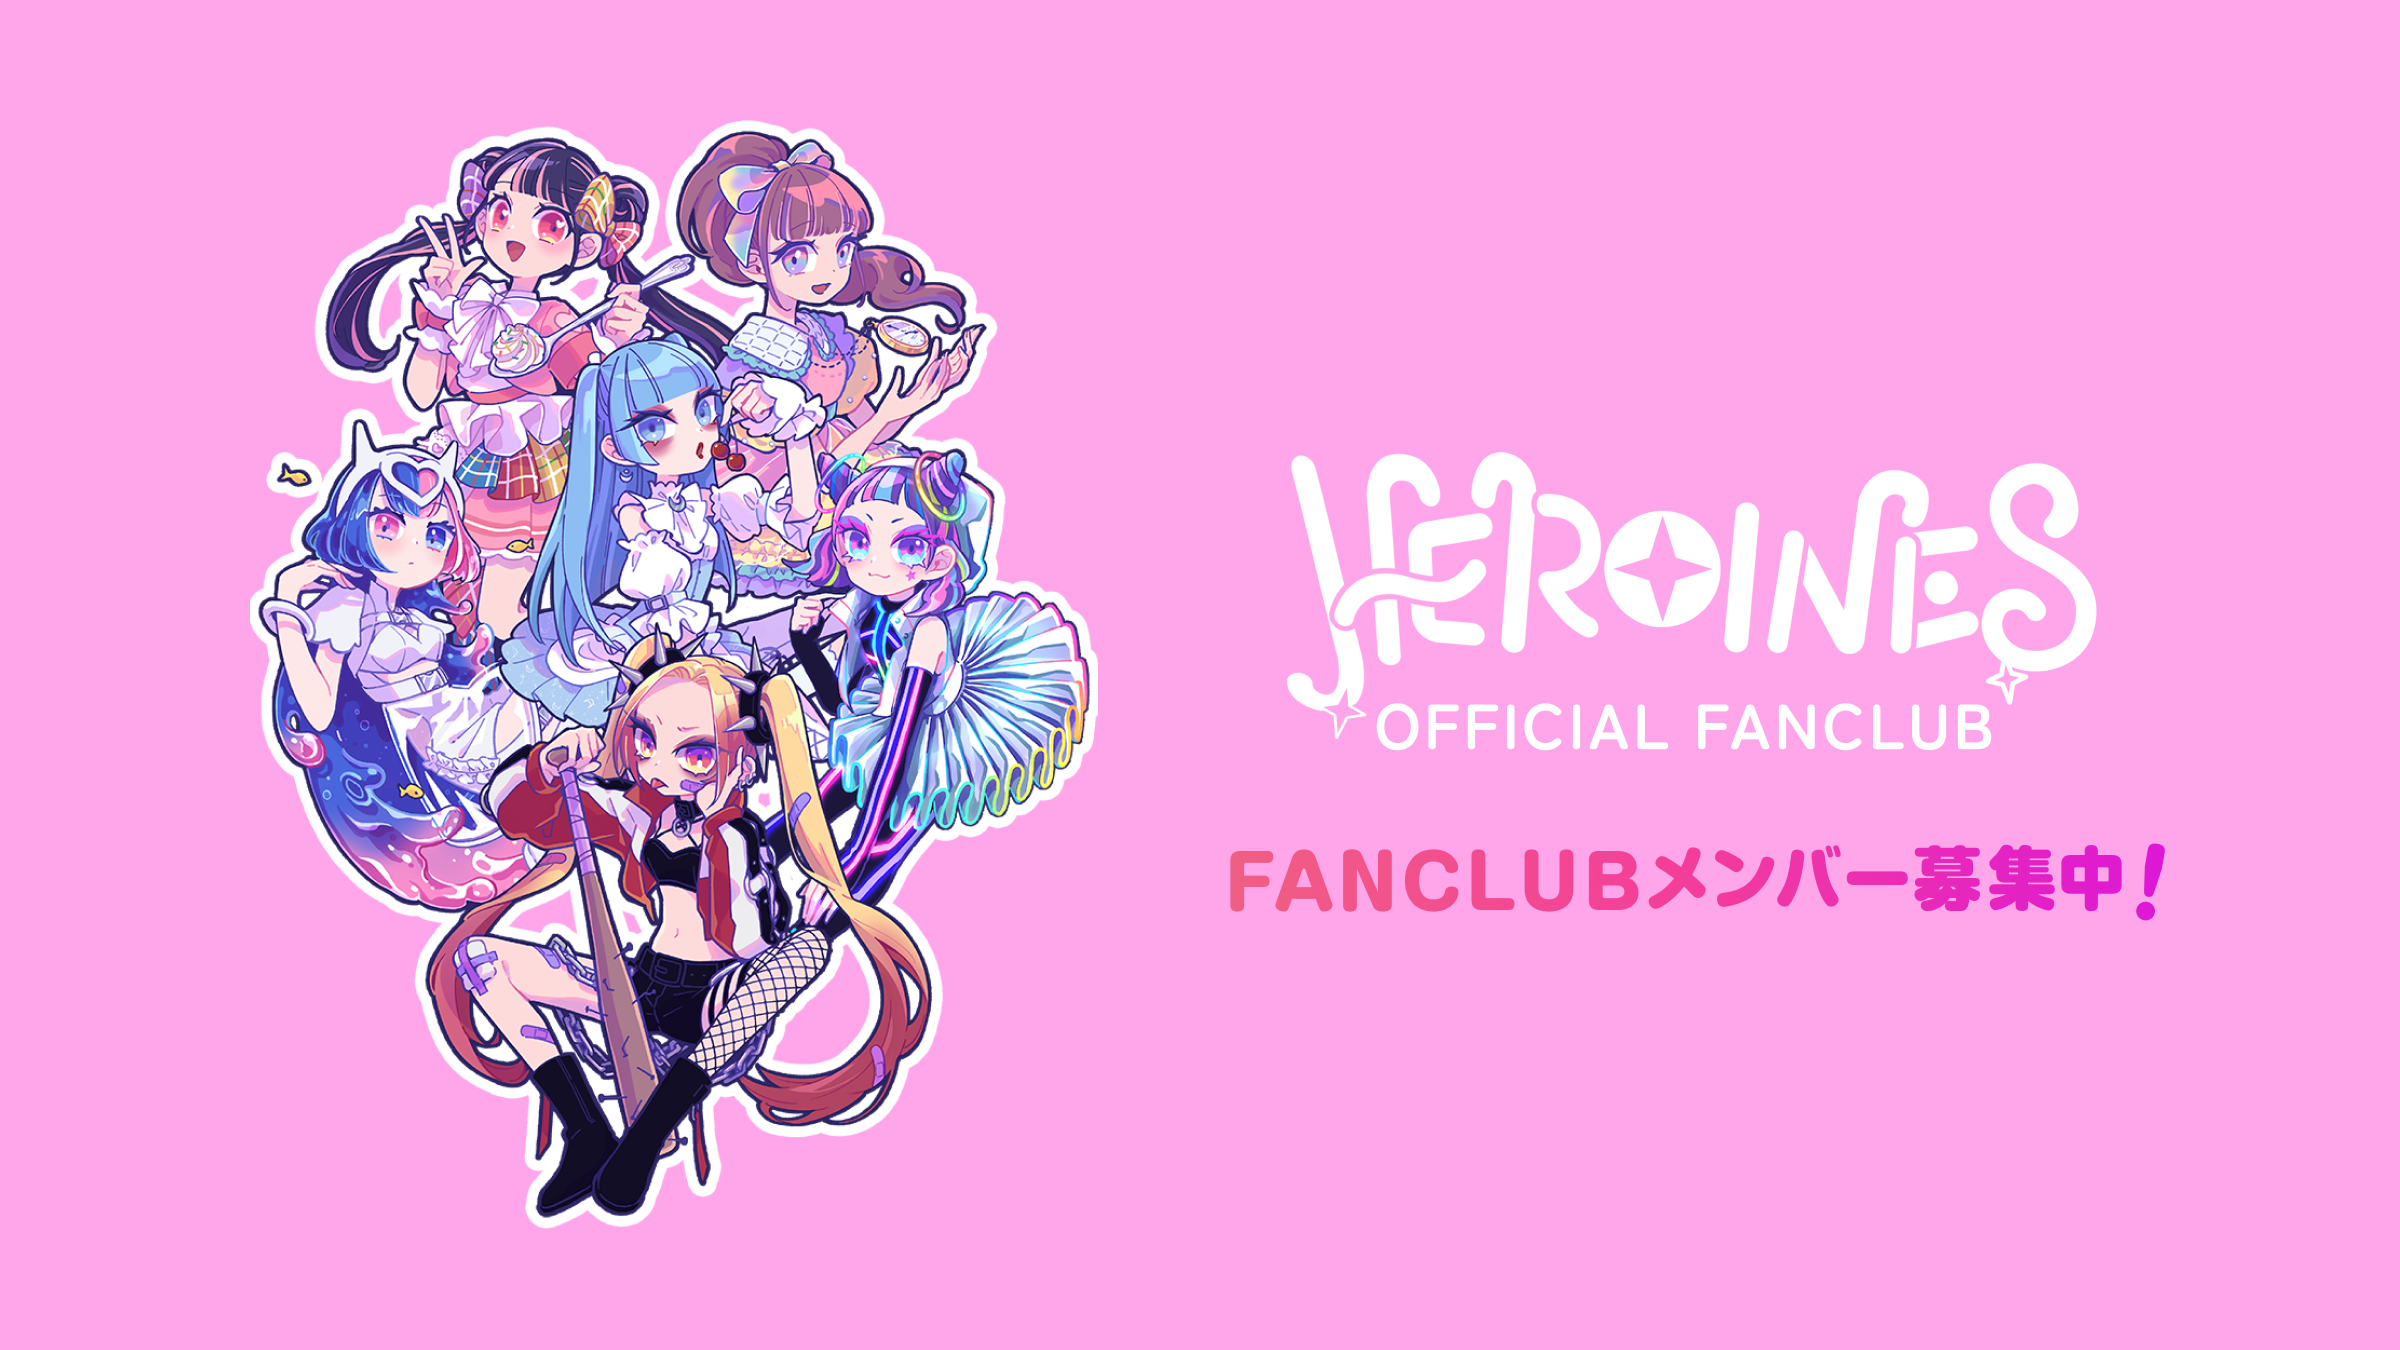 HEROINES OFFICIAL FANCLUB